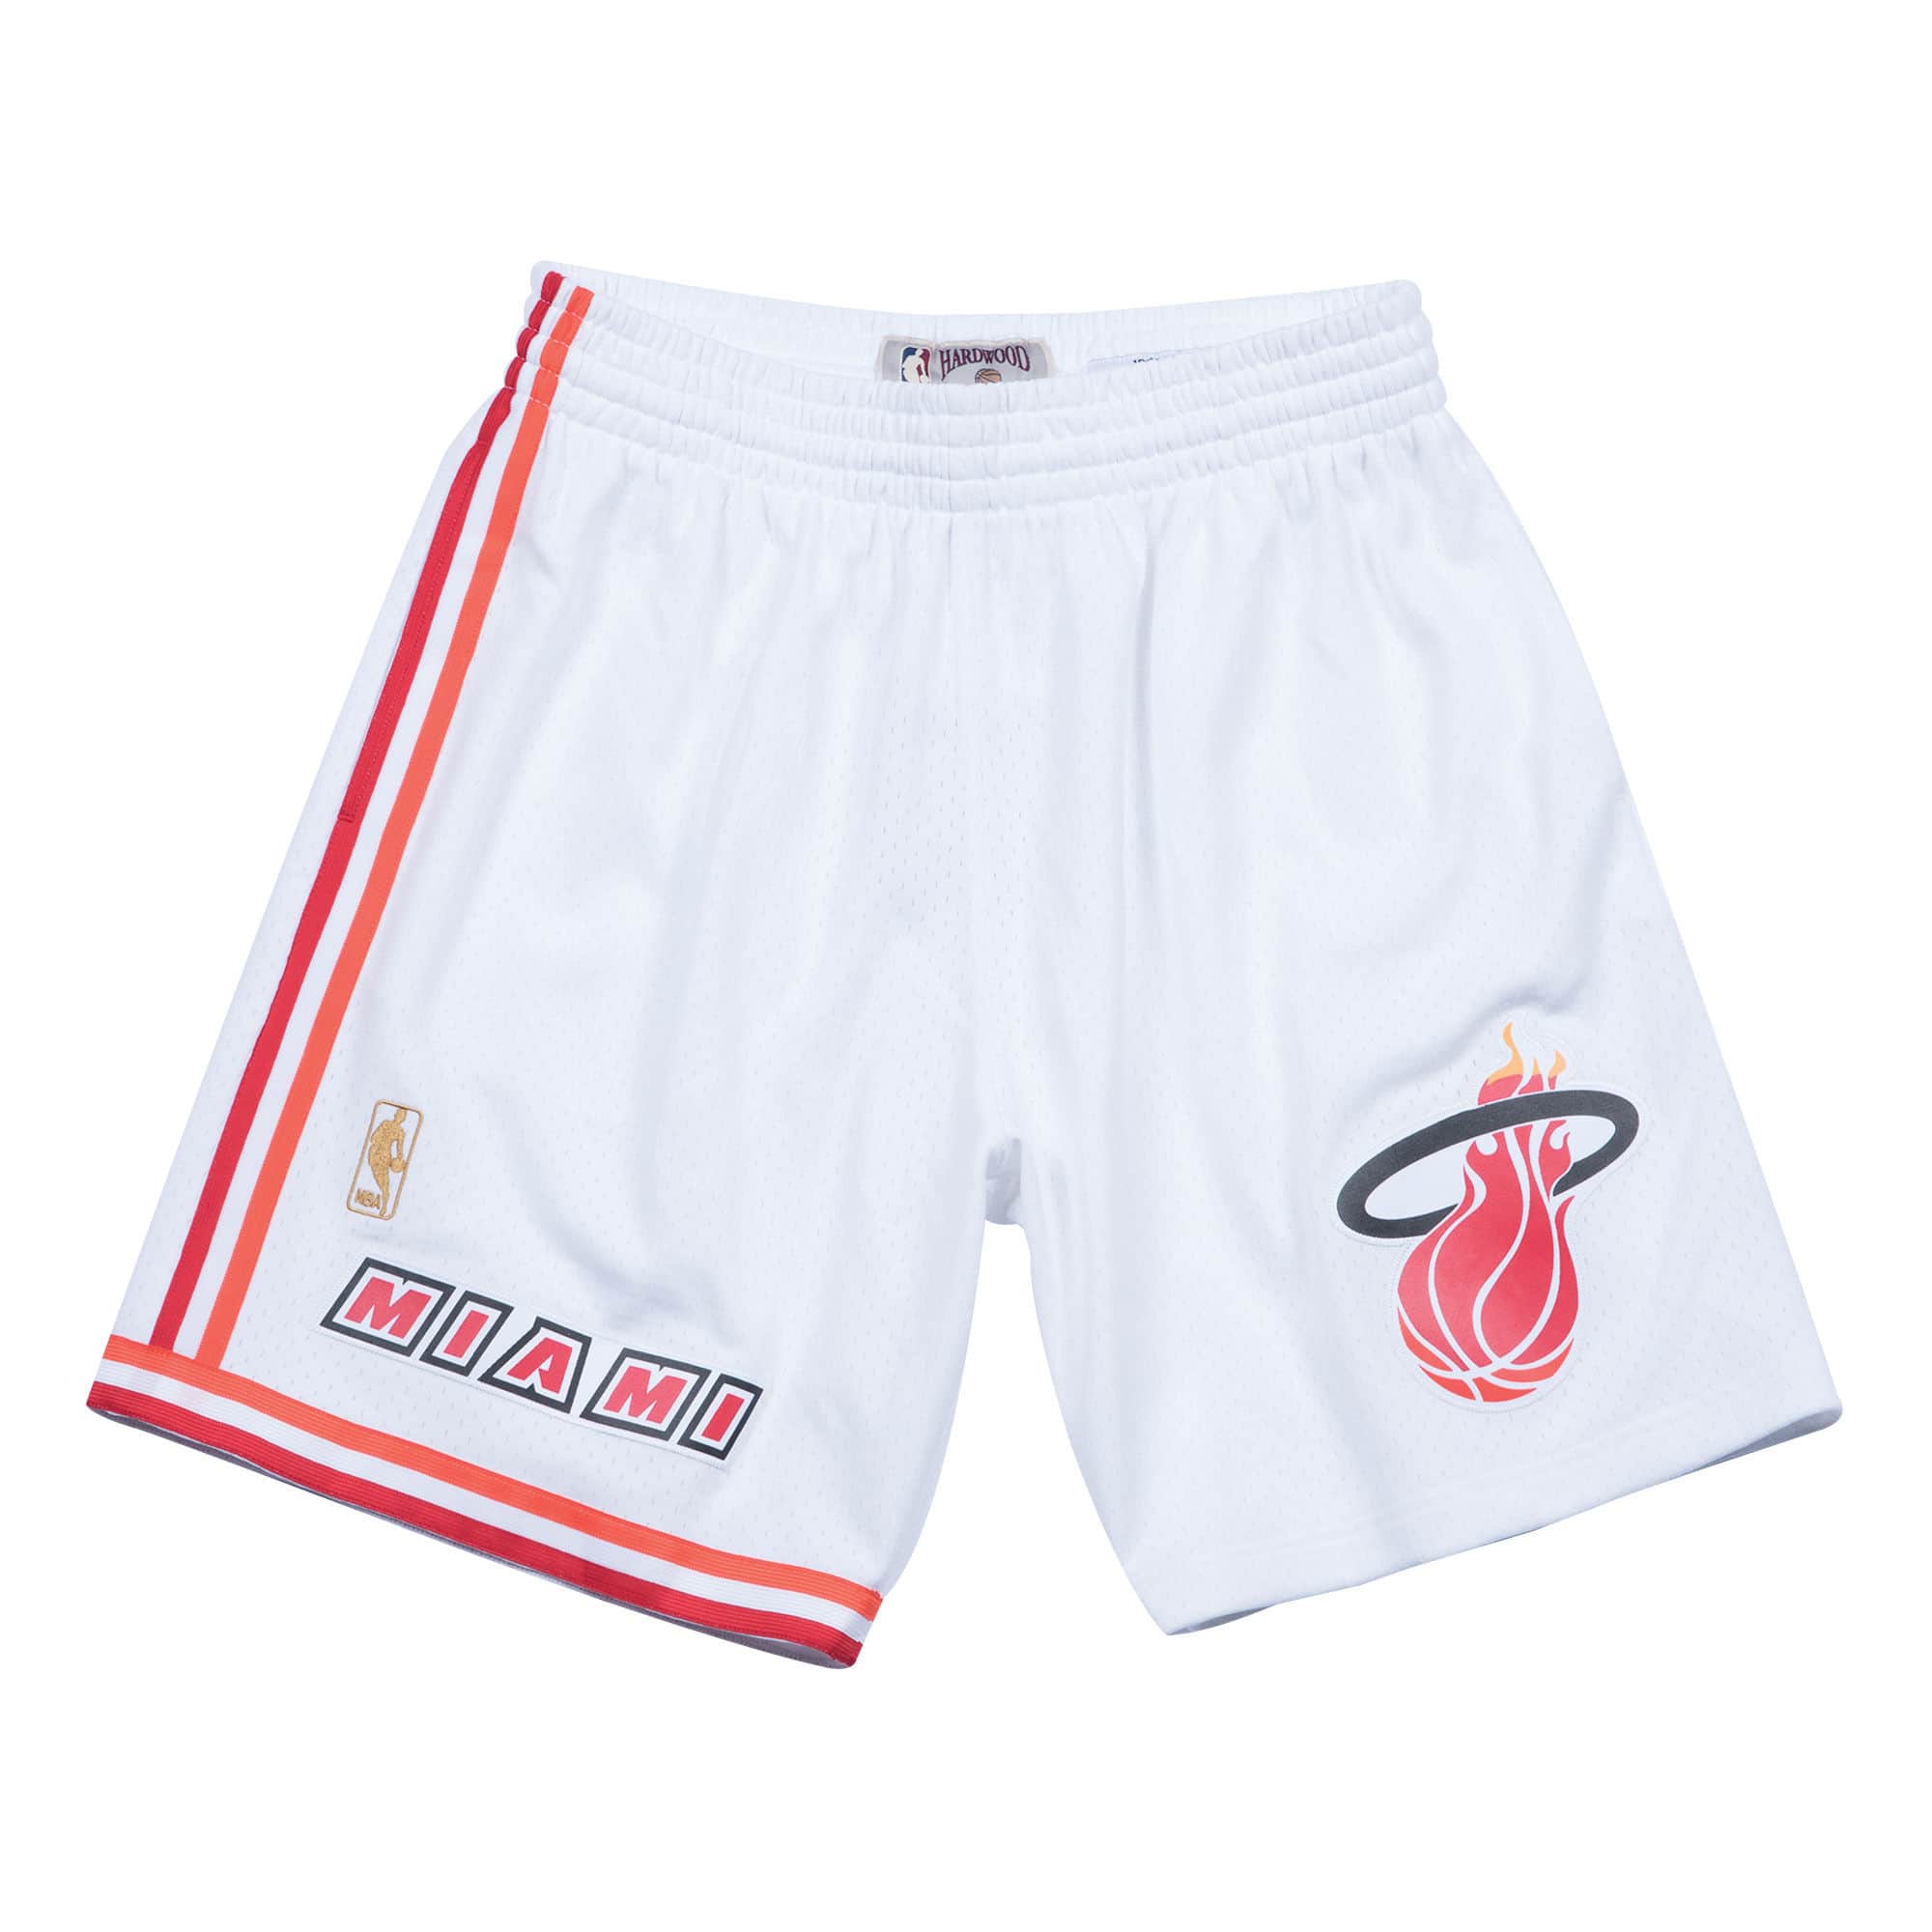 Mitchell & Ness Shorts | Mitchell & Ness Spray Paint Miami Heat Floridians Swingman Shorts Size XL | Color: Red | Size: XL | Obey46's Closet